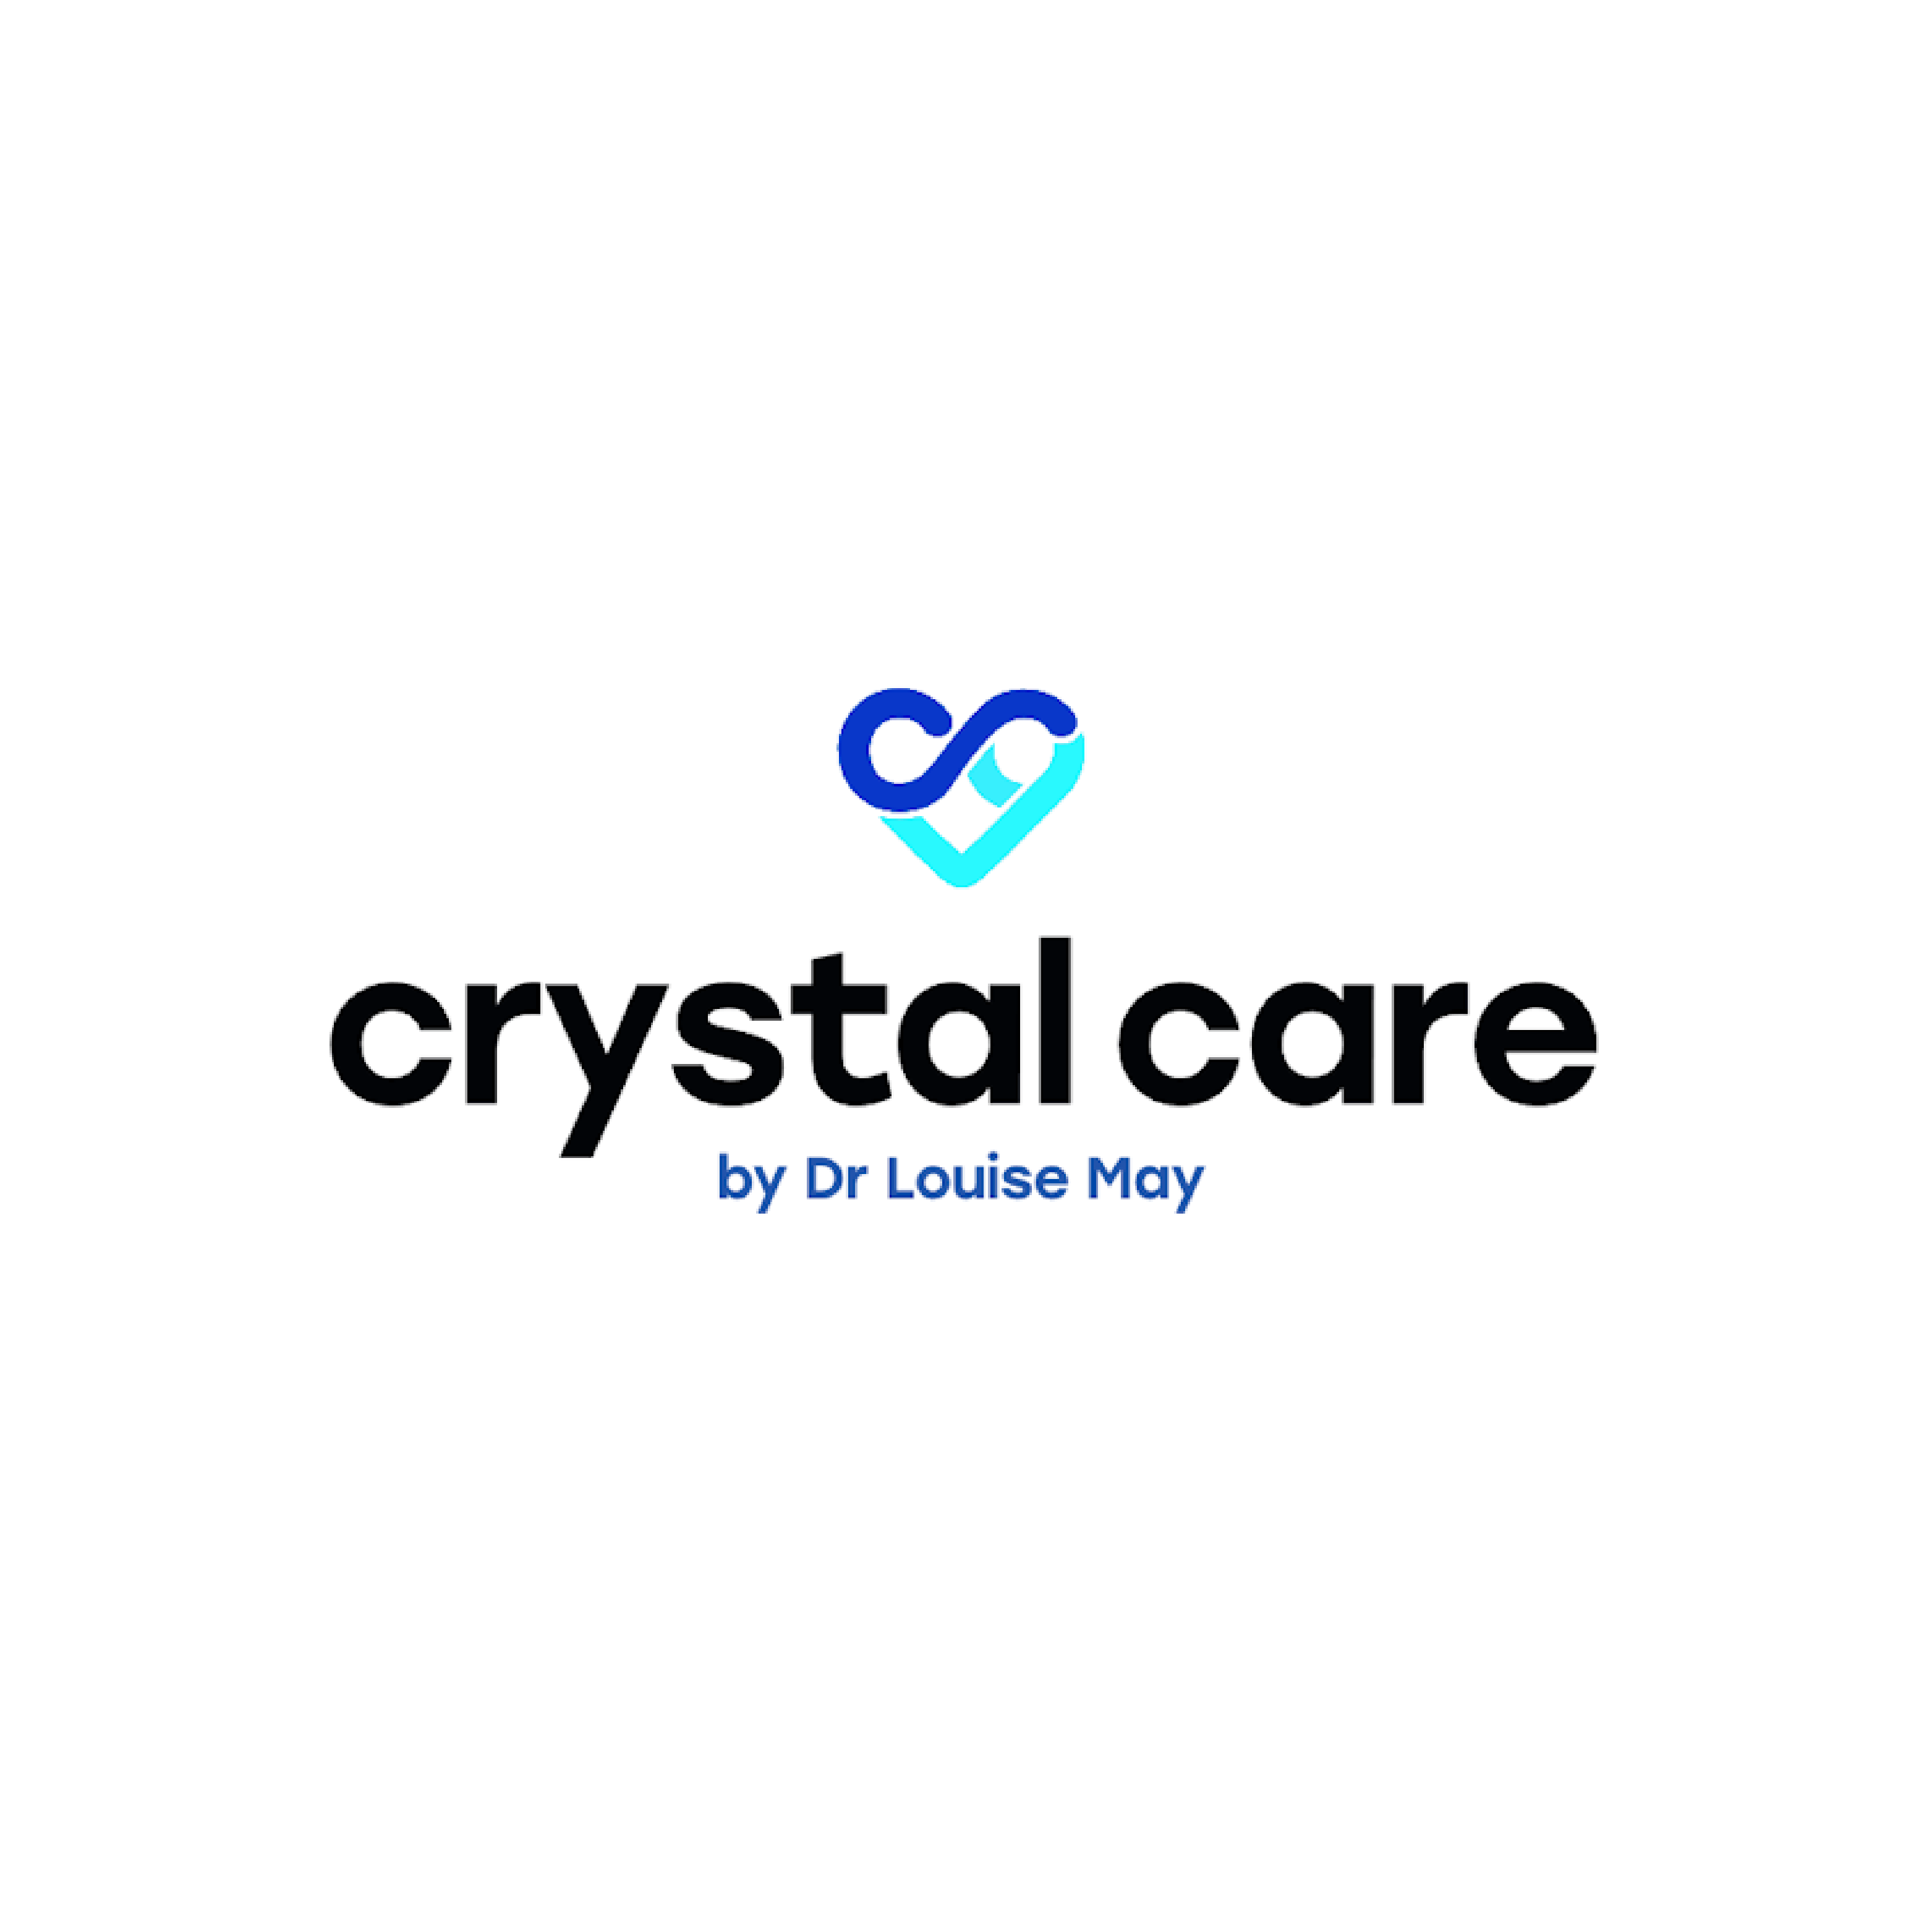 Crystal Care heart logo with infinity symbol